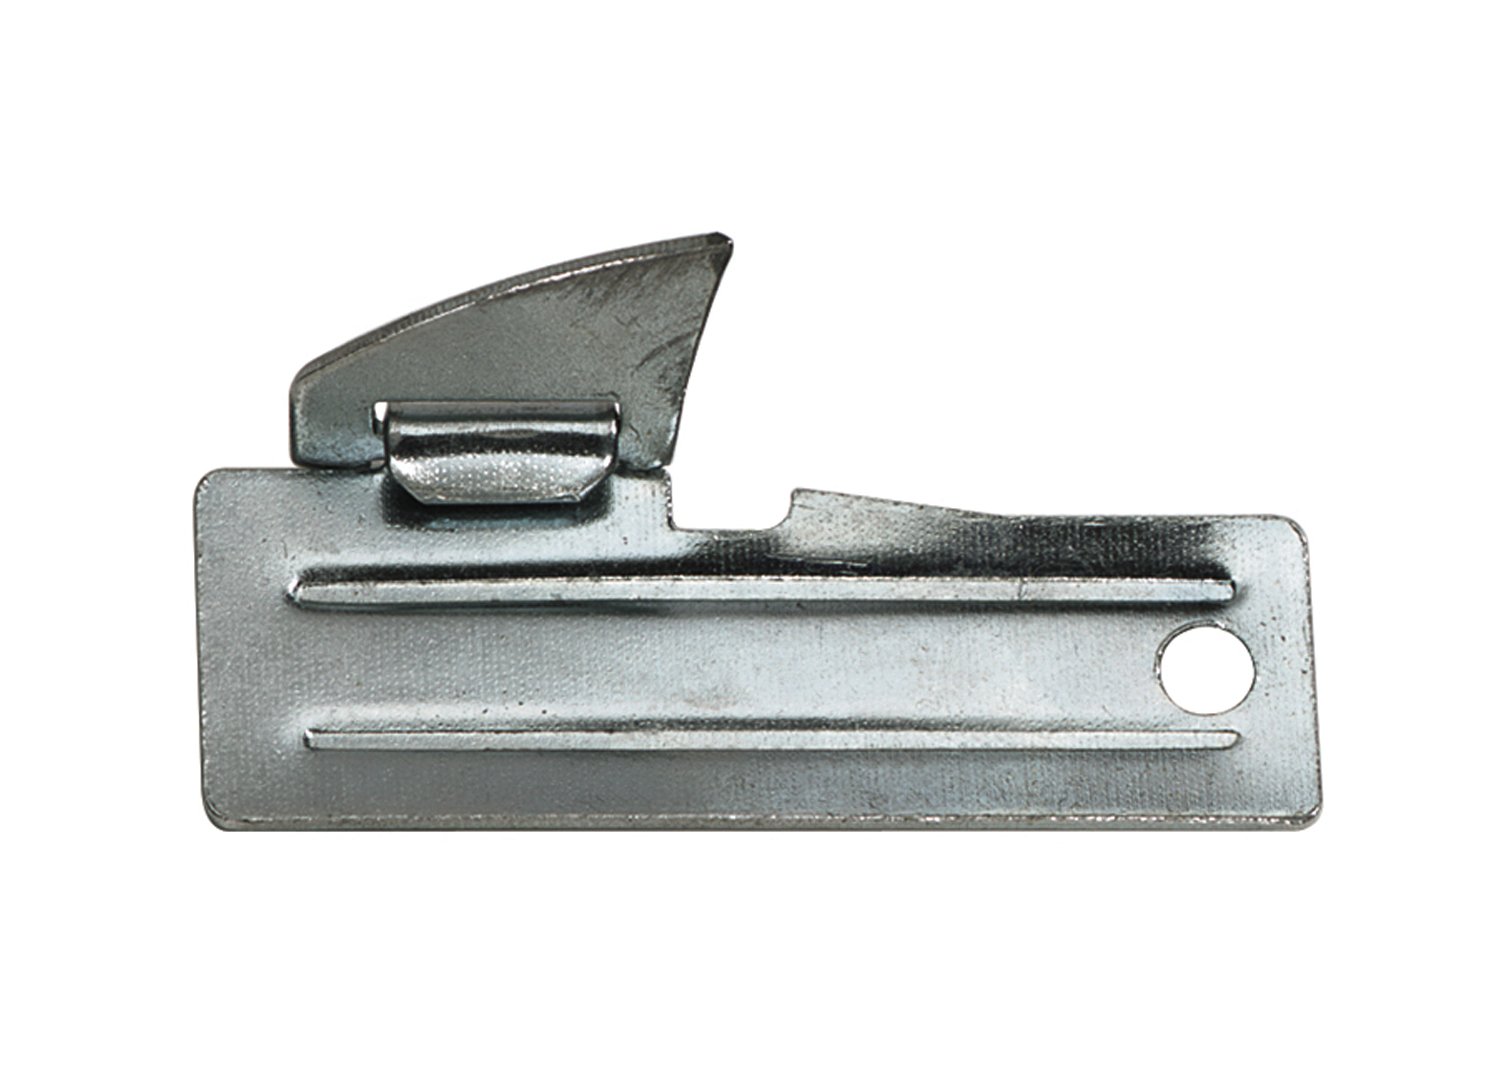 G.I. Type 5-pack P38 Can Openers - Tactical Choice Plus